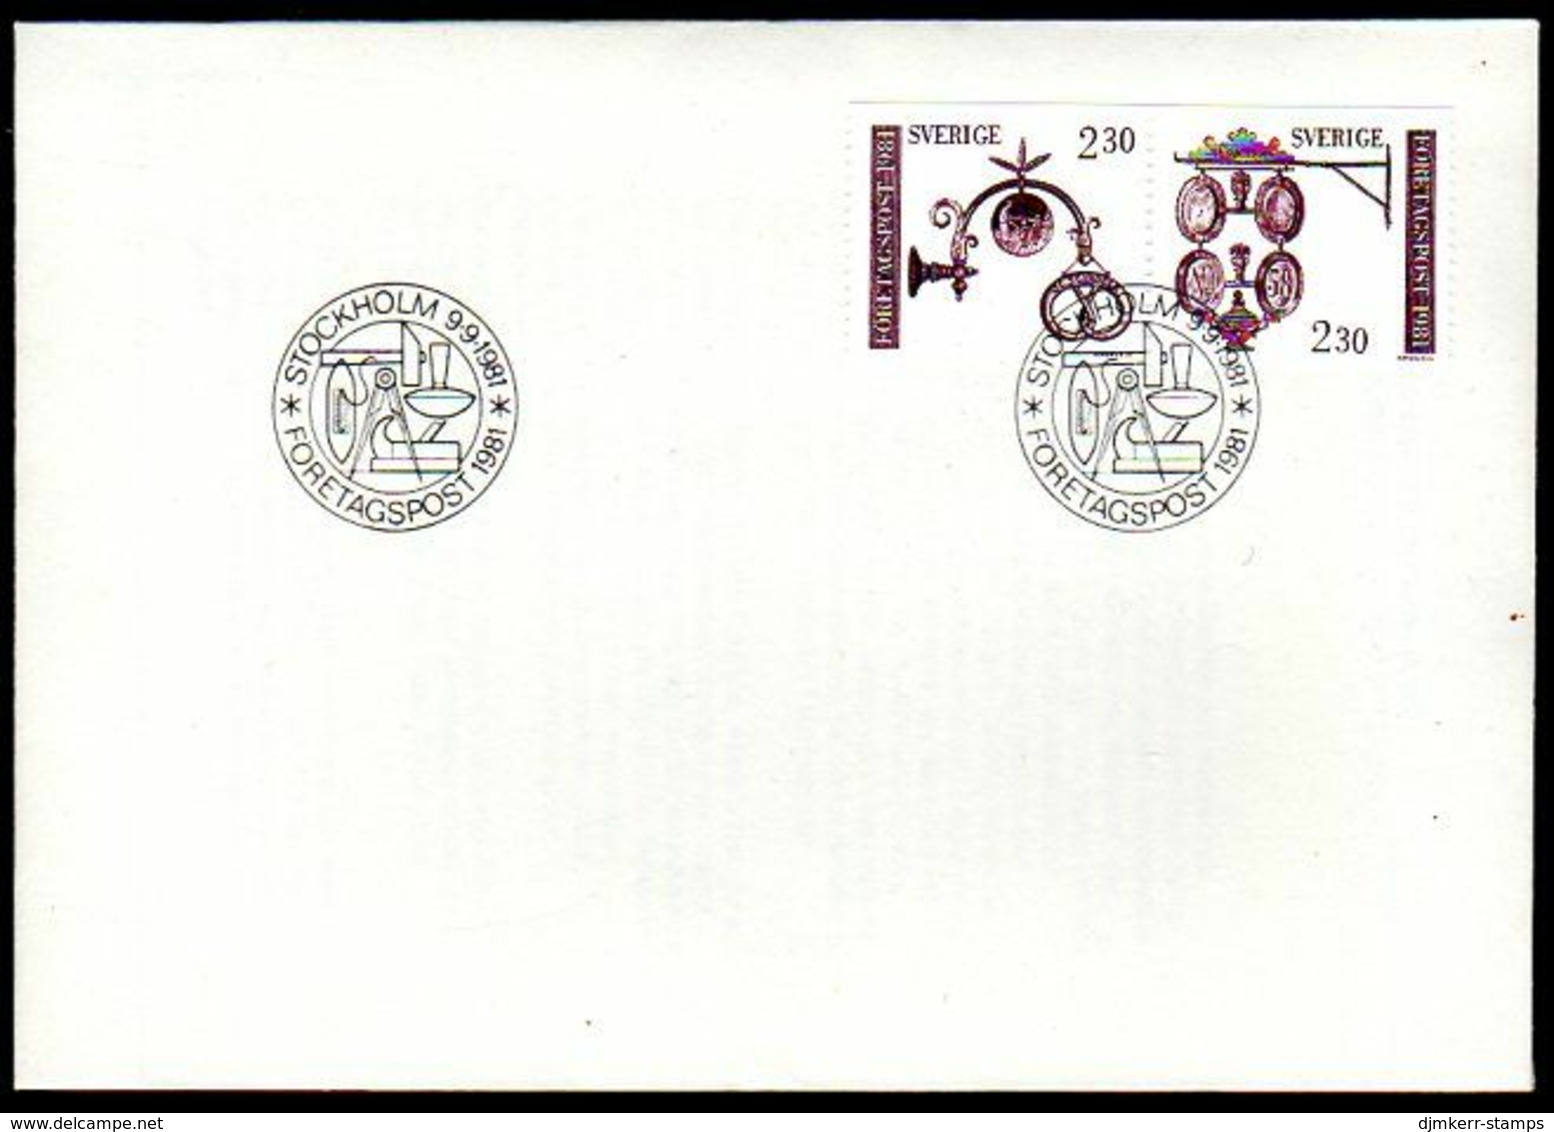 SWEDEN 1981 Trade Signs FDC. Michel 1166-67 - FDC